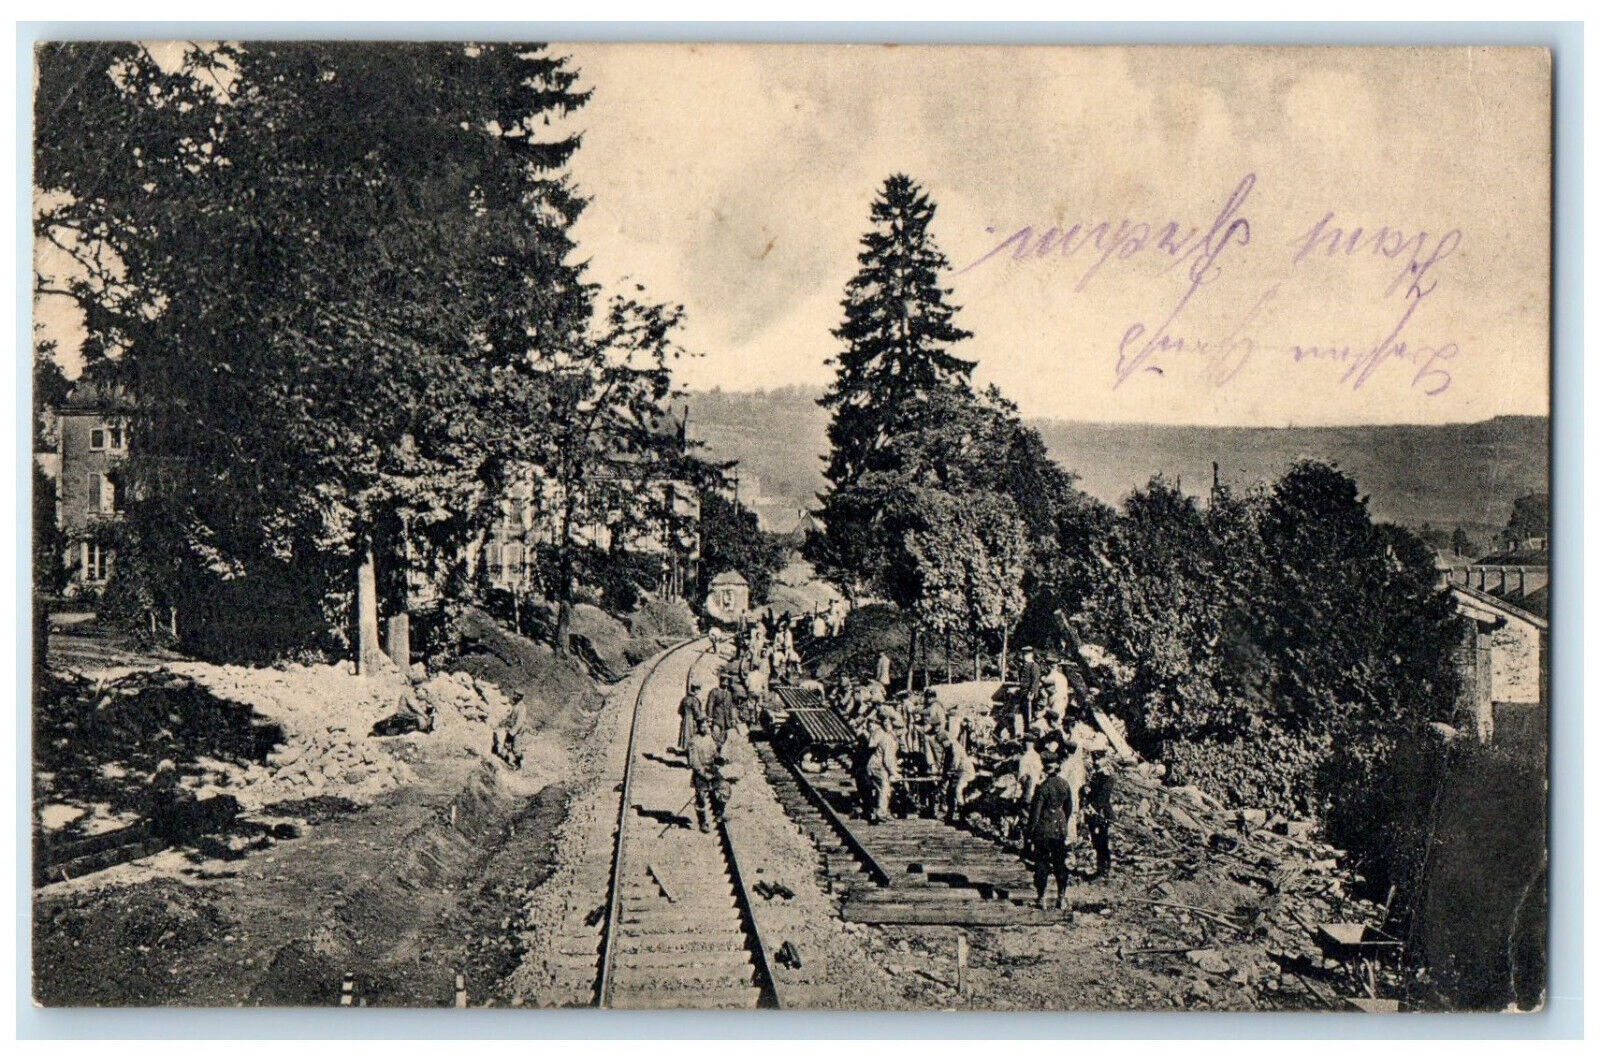 1912 Scene of Railroad Troops At Work Germany Antique Posted Postcard